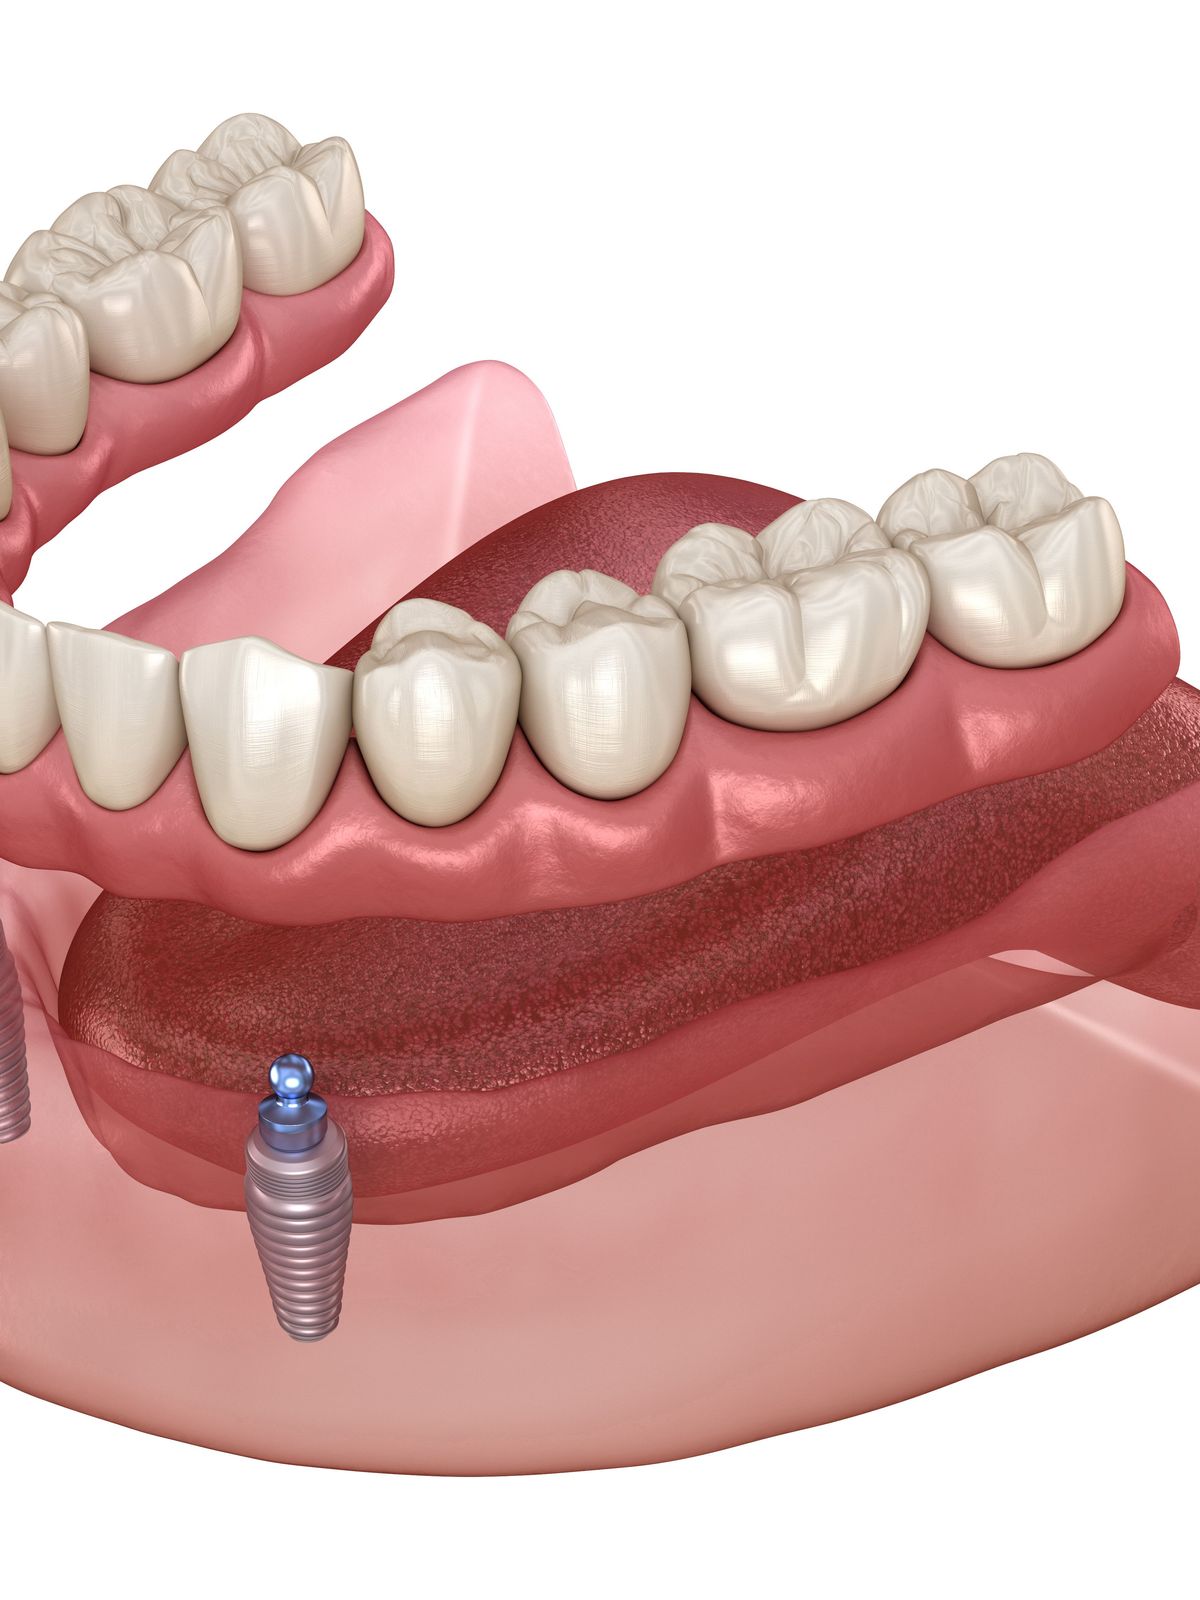 Implant Retained Denture featured image